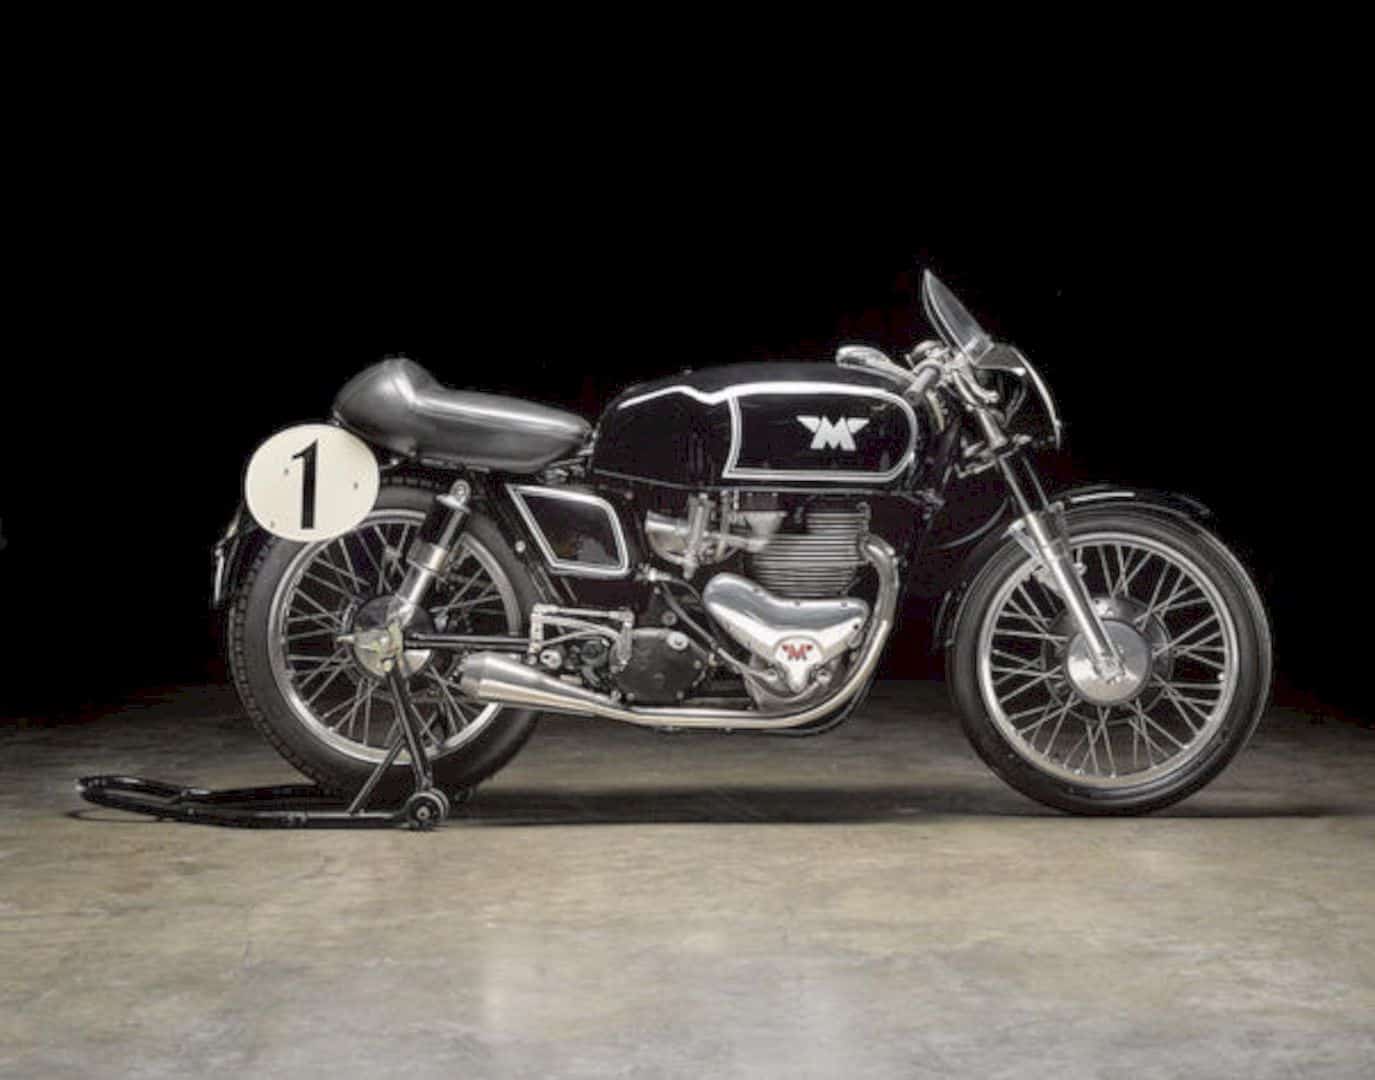 The 1955 Matchless 498cc G45 Motorcycle 1